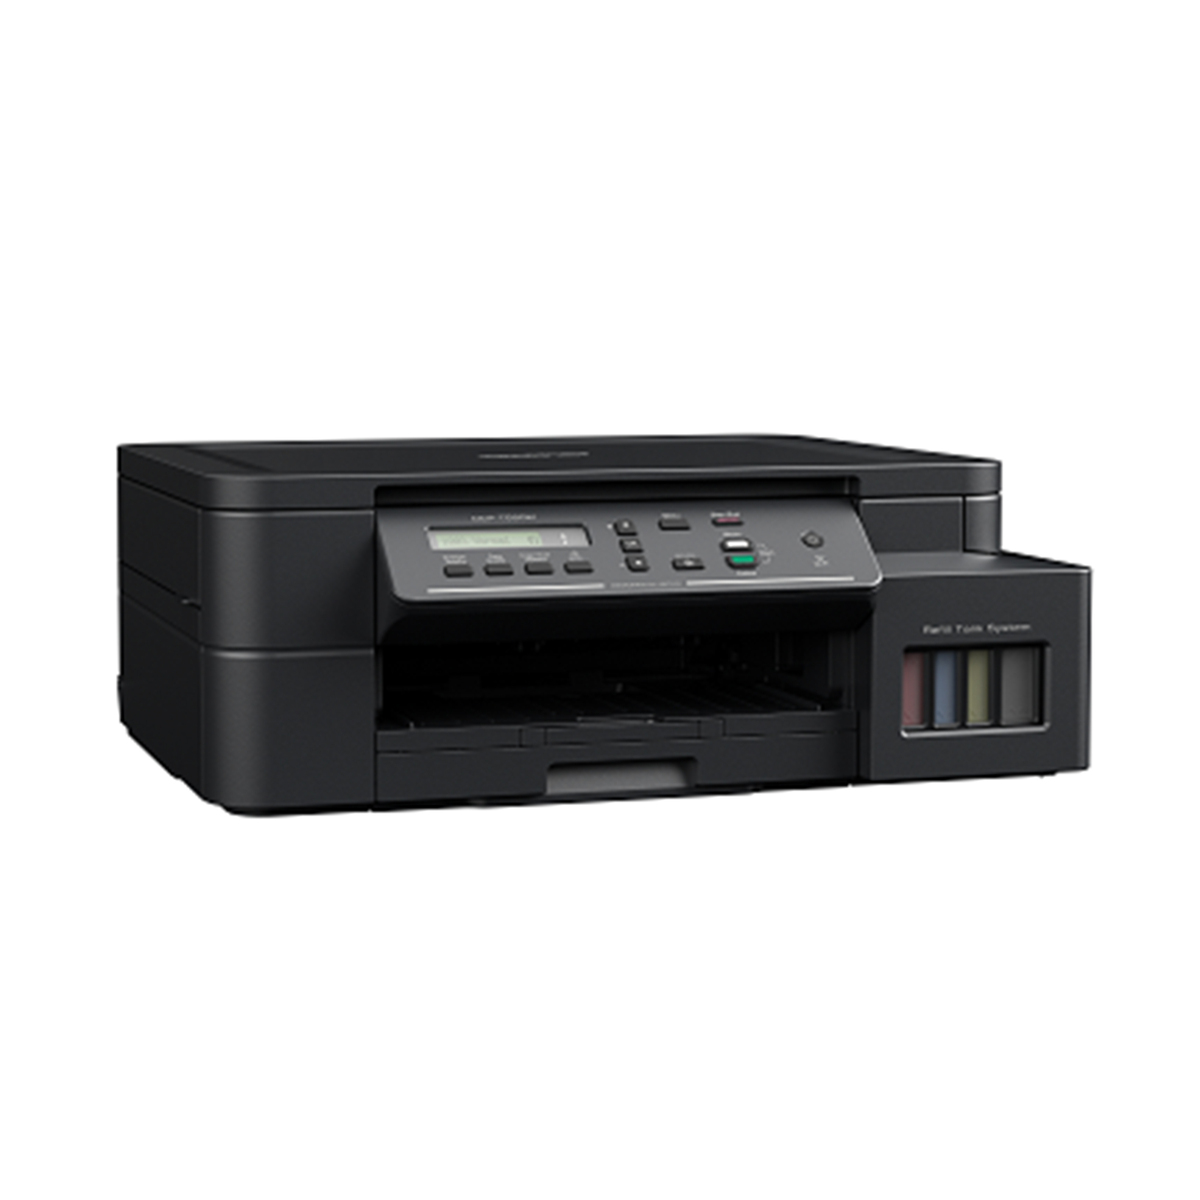 Brother DCP-T520W All-In-One Ink Tank Refill System Printer